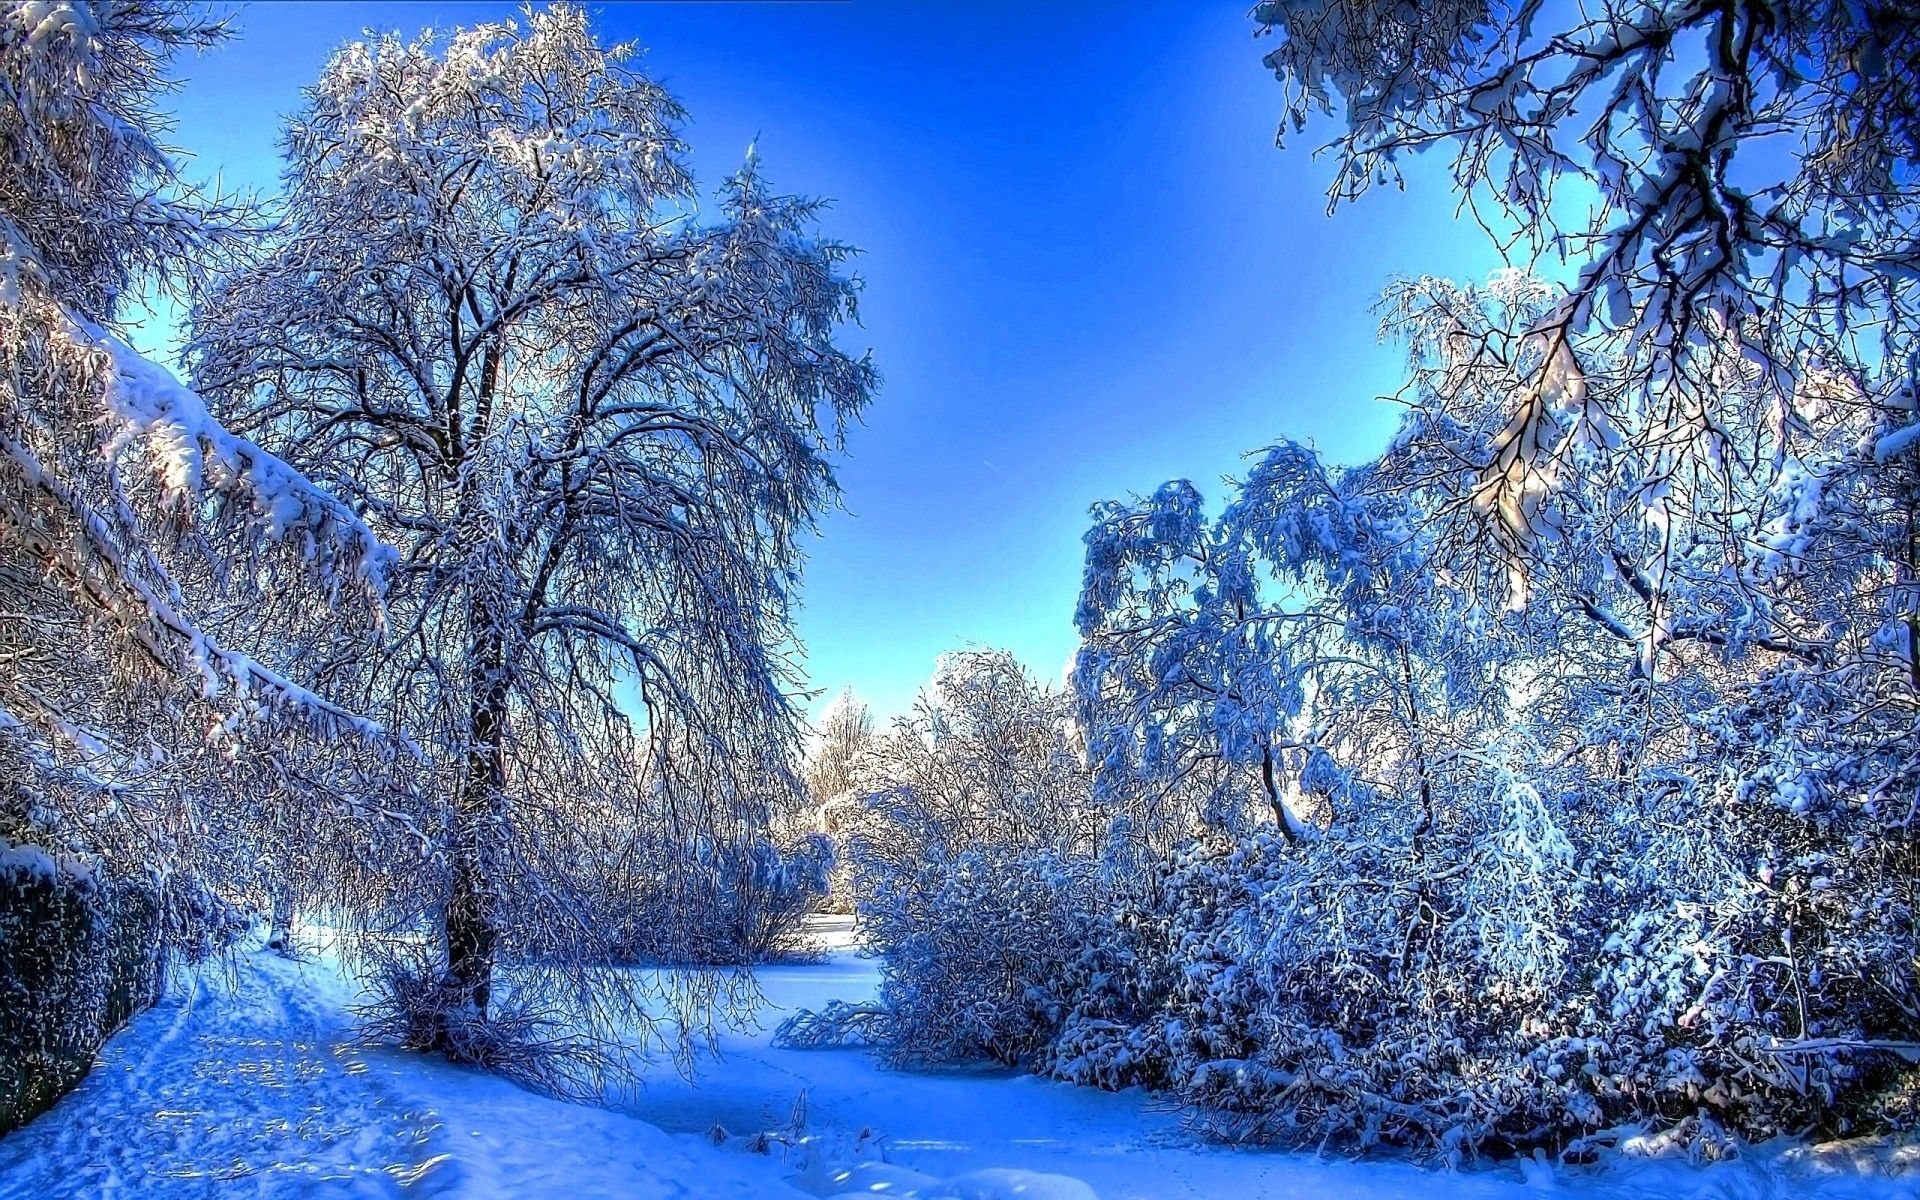 I deicide to show you some special places. Winter landscape, Winter wallpaper, Winter snow wallpaper